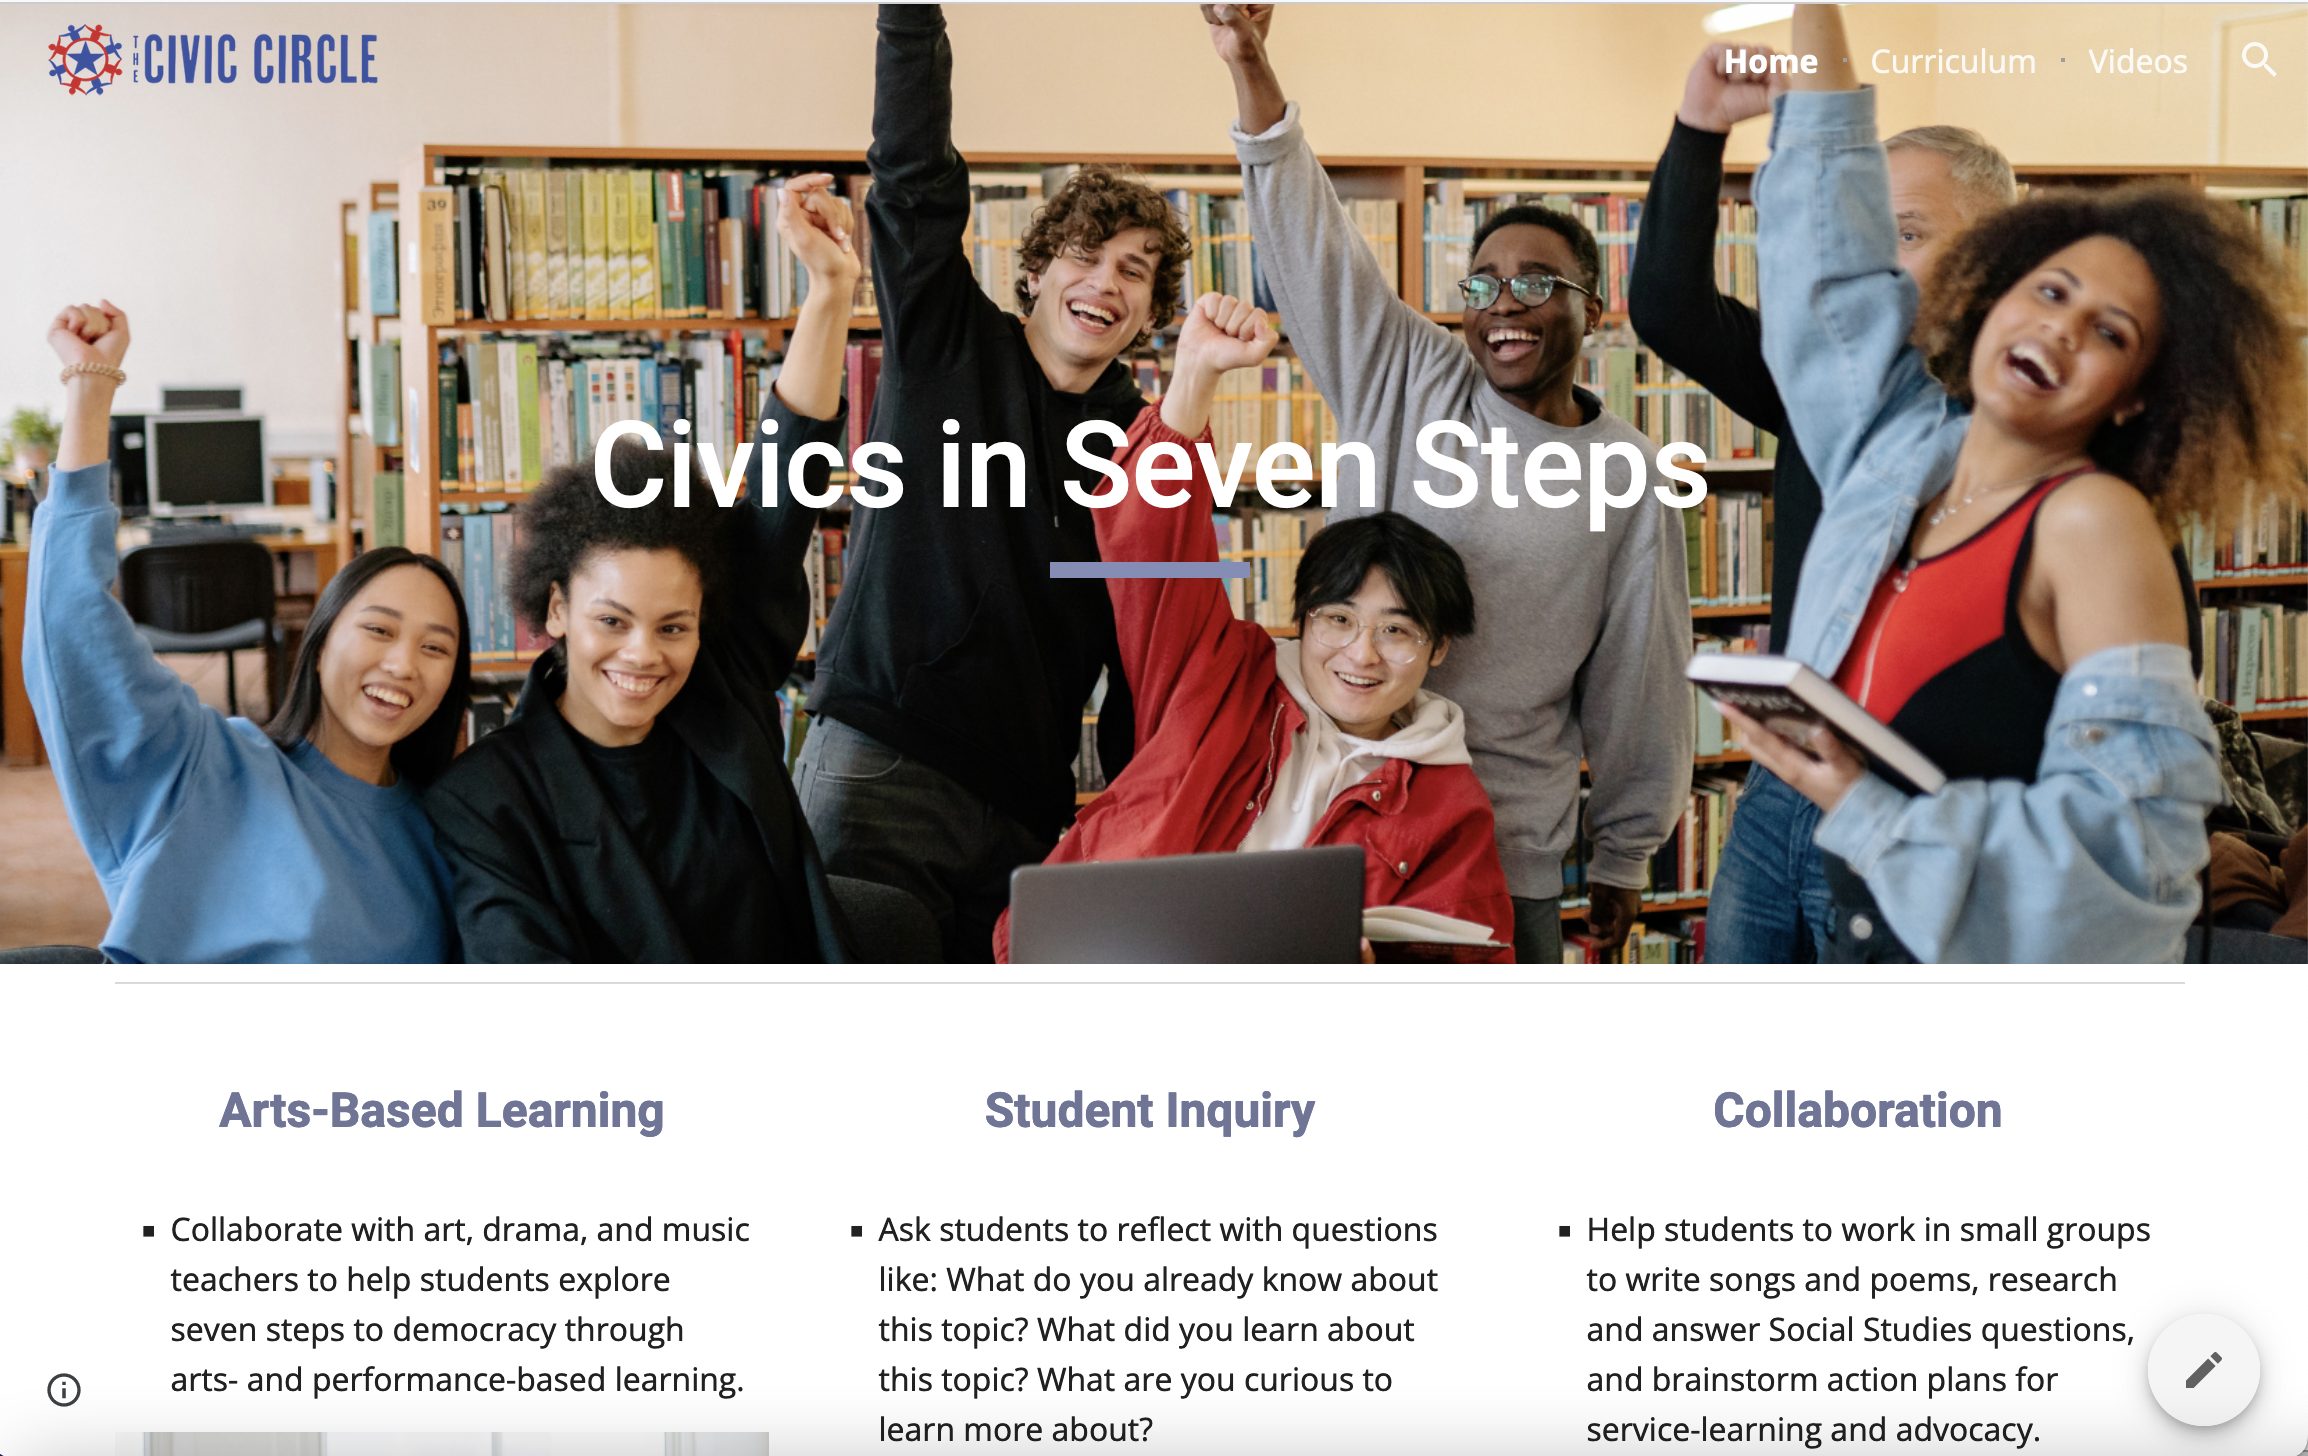 Civics in Seven Steps: Arts-based learning: Collaborate with art, drama, and music teachers to help students explore seven steps to democracy through arts- and performance-based learning. Student Inquiry: Ask students to reflect with questions like: What do you already know about this topic? What did you learn about this topic? What are you curious to learn more about? Collaboration: Help students to work in small groups to write songs and poems, research and answer Social Studies questions, and brainstorm action plans for service-learning and advocacy.